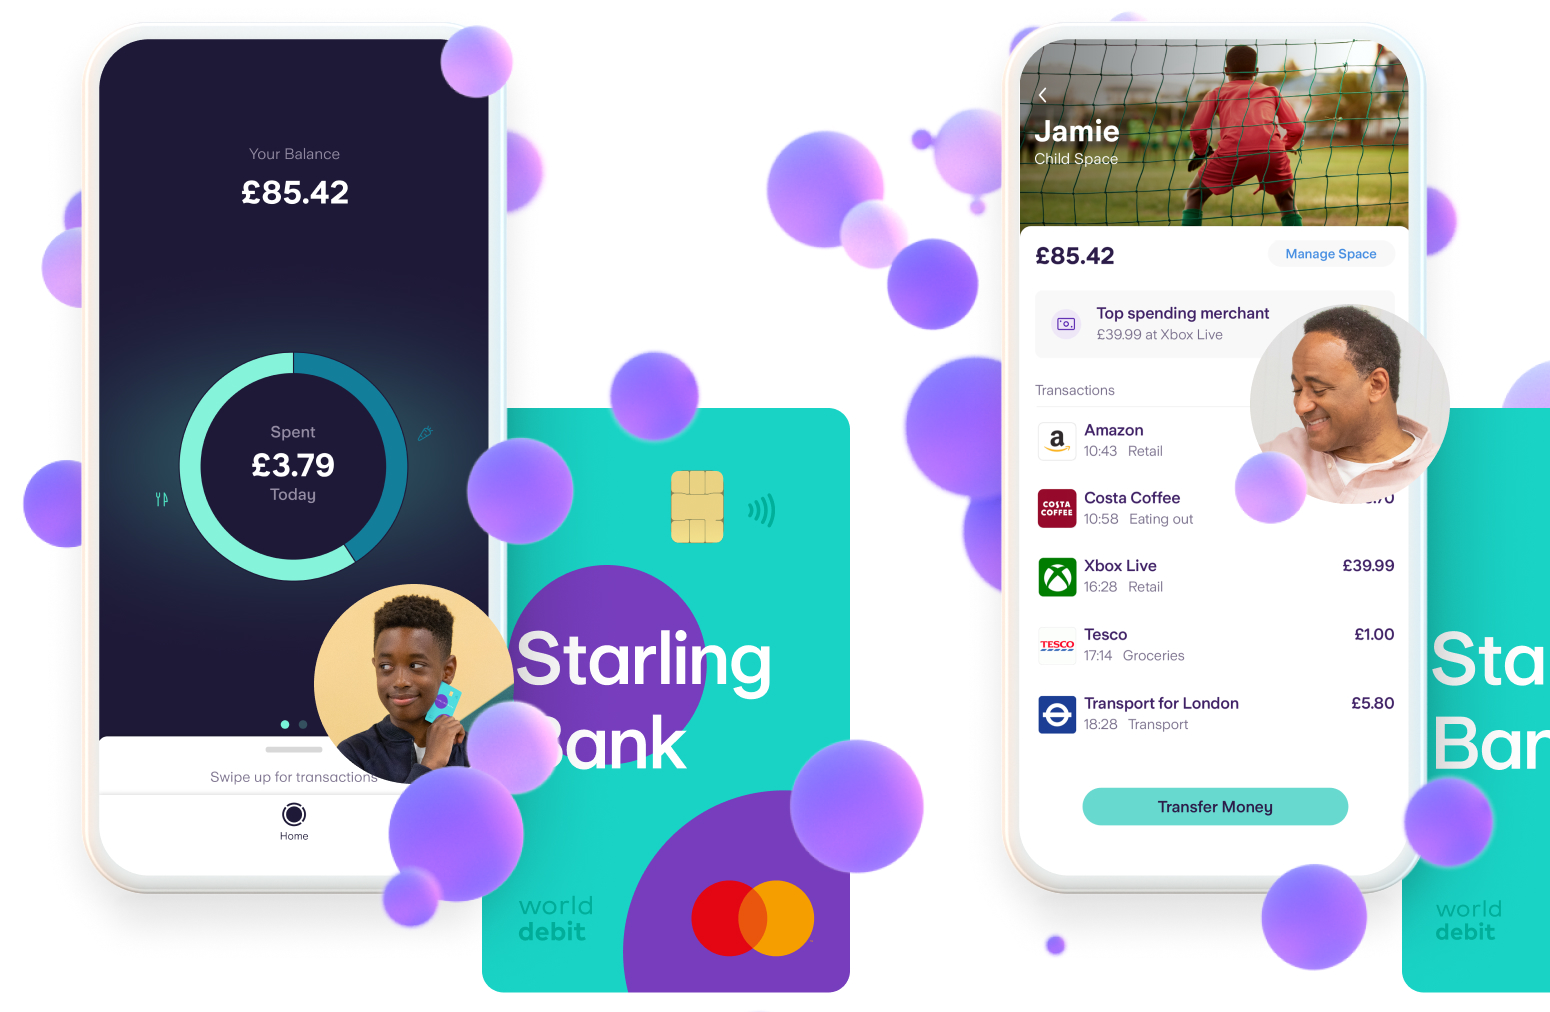 Starling Bank's Kite card features